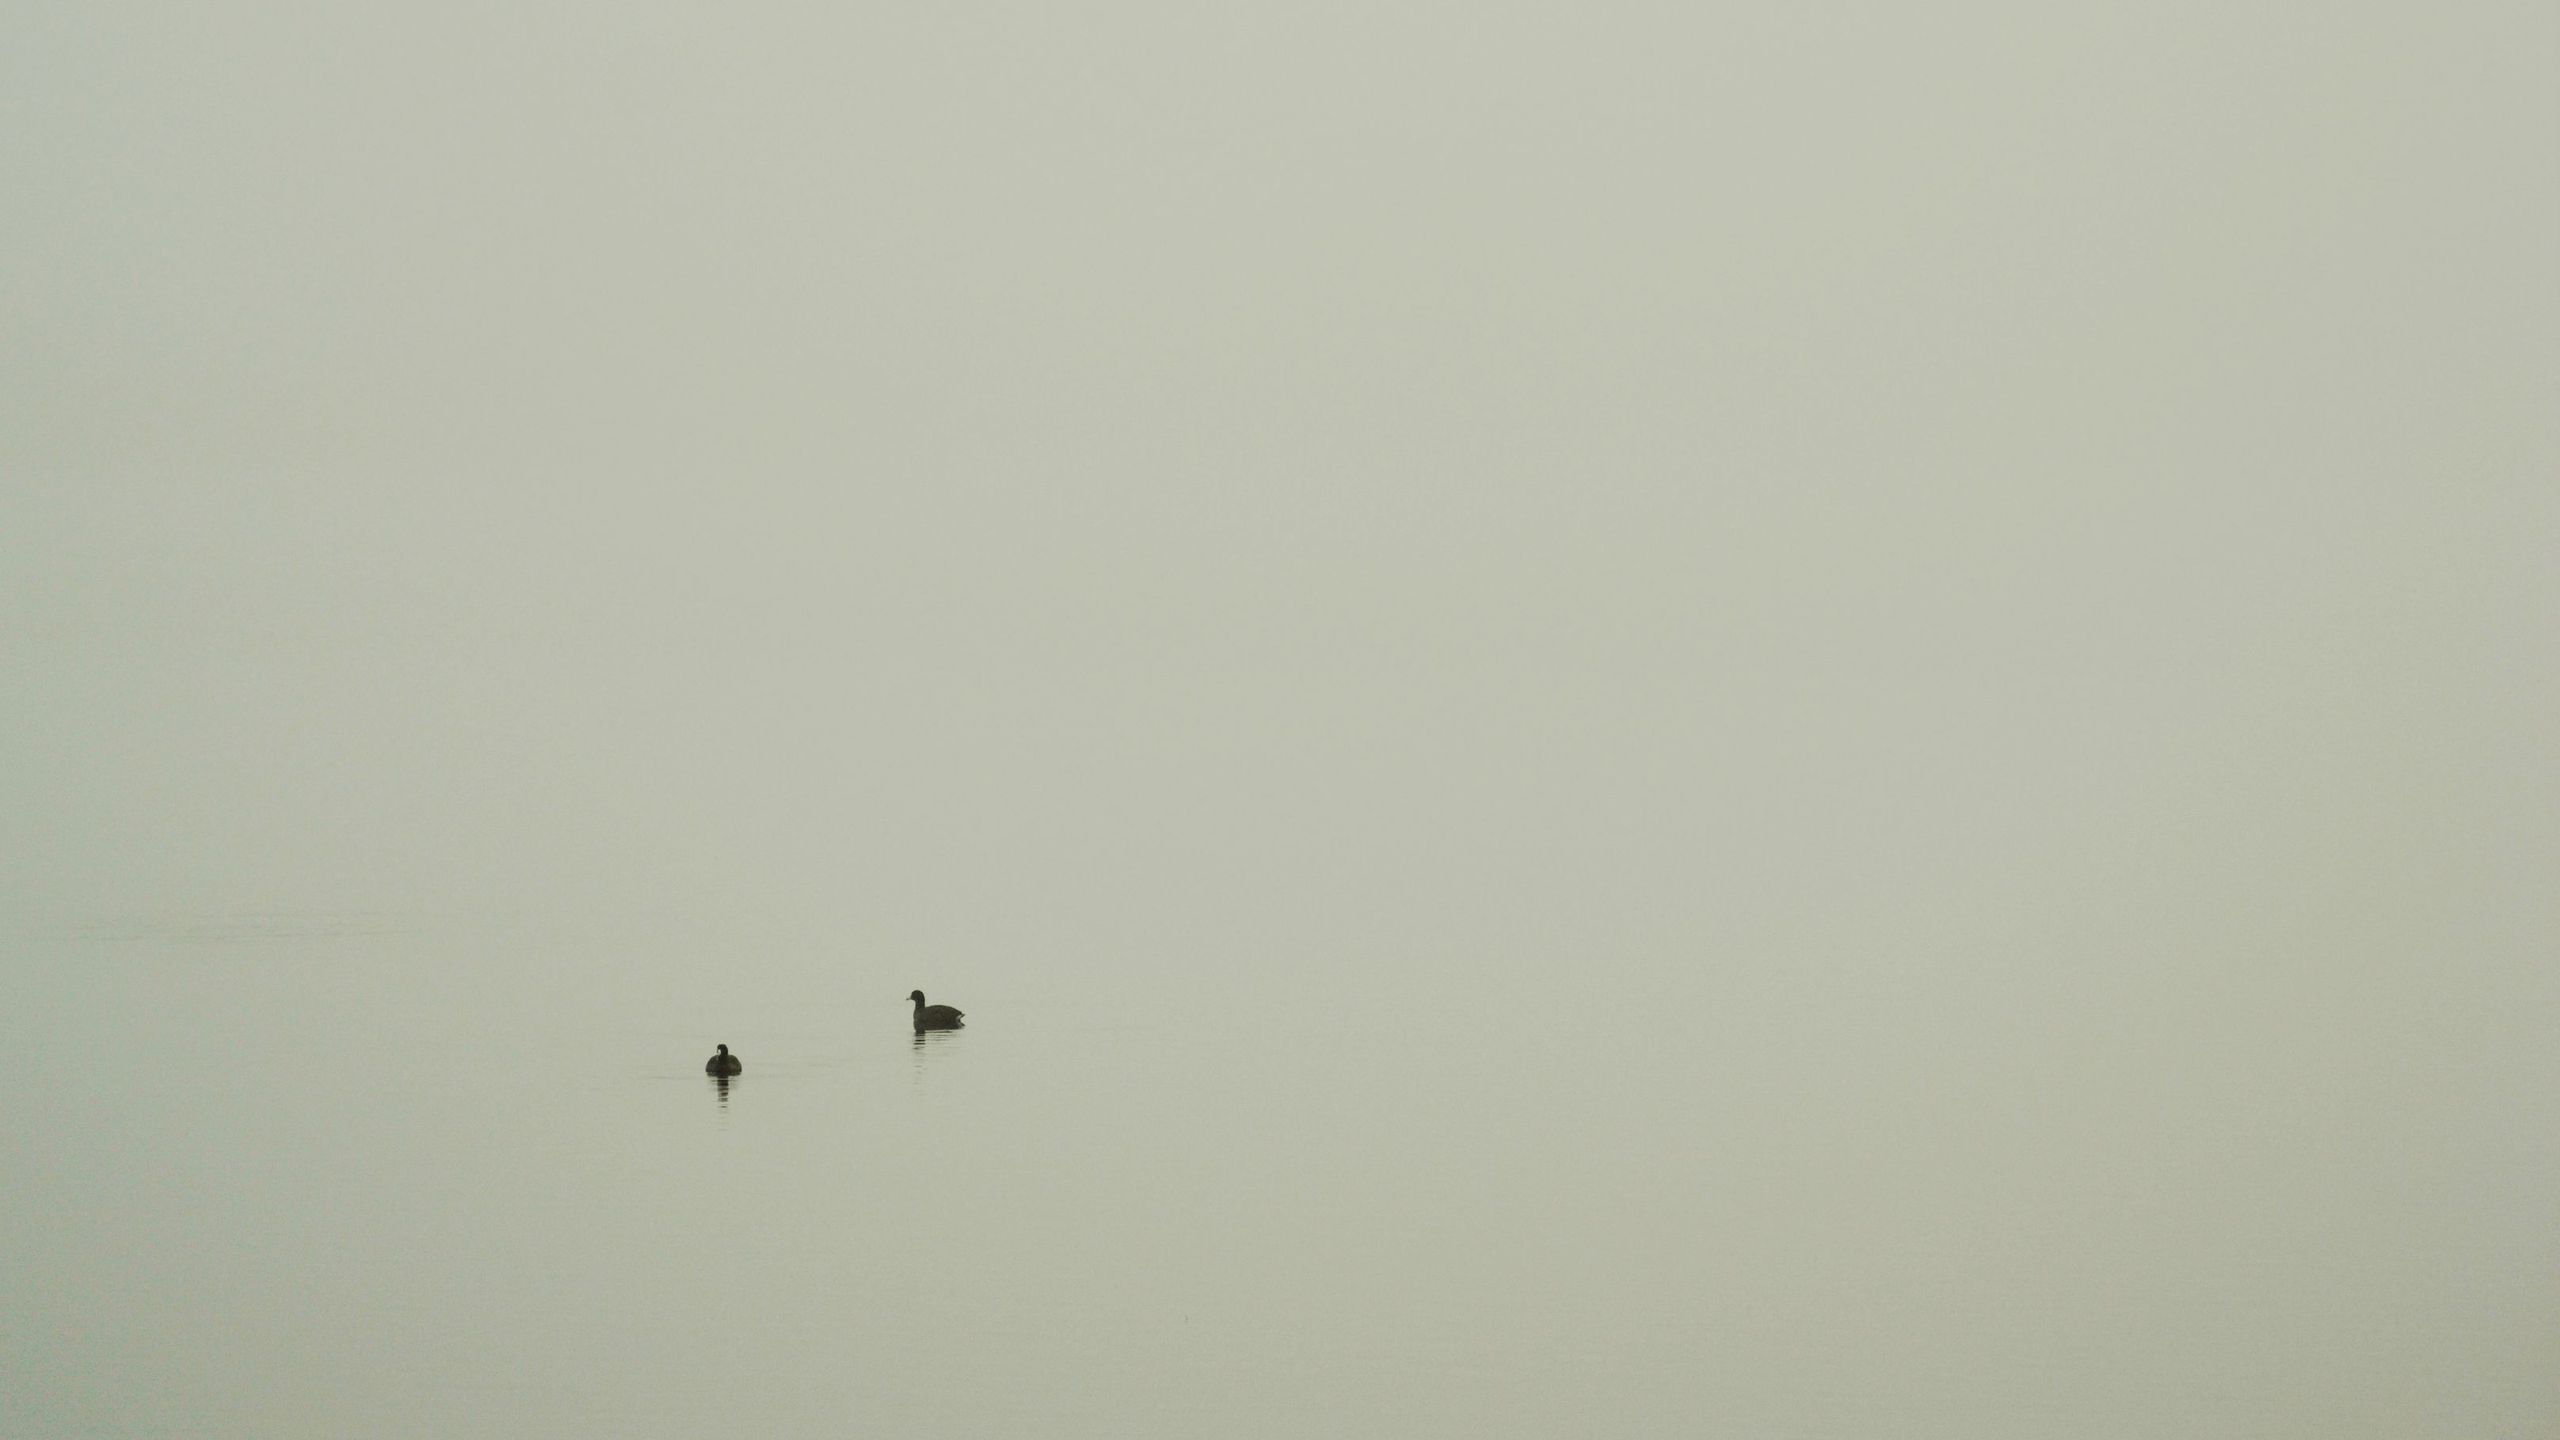 Wildlife preserve on a foggy day. Minimal or boring? Any thoughts ...